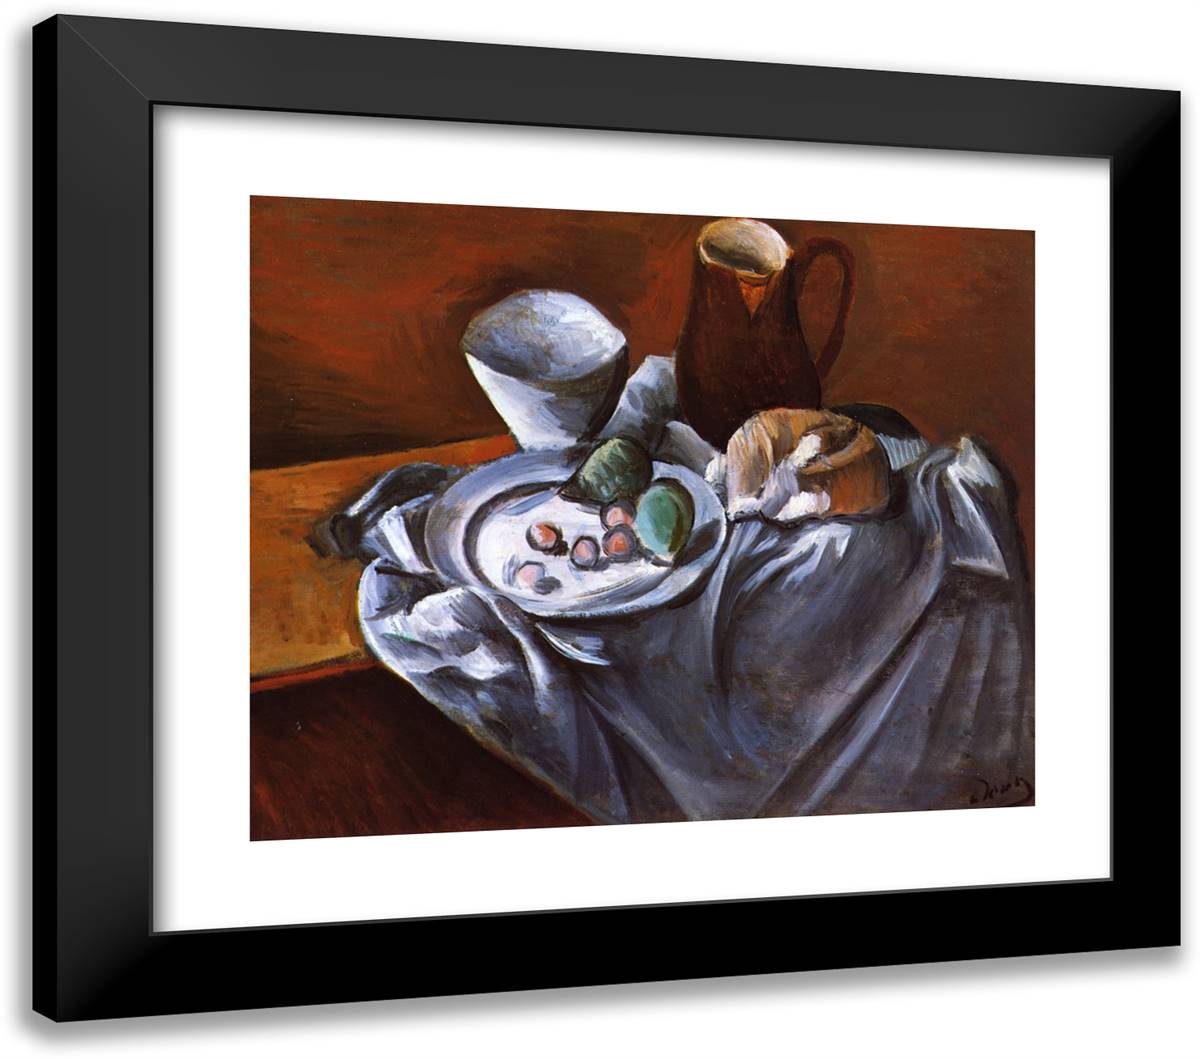 Still Life with Pears and Indian Bowl 23x20 Black Modern Wood Framed Art Print Poster by Derain, Andre